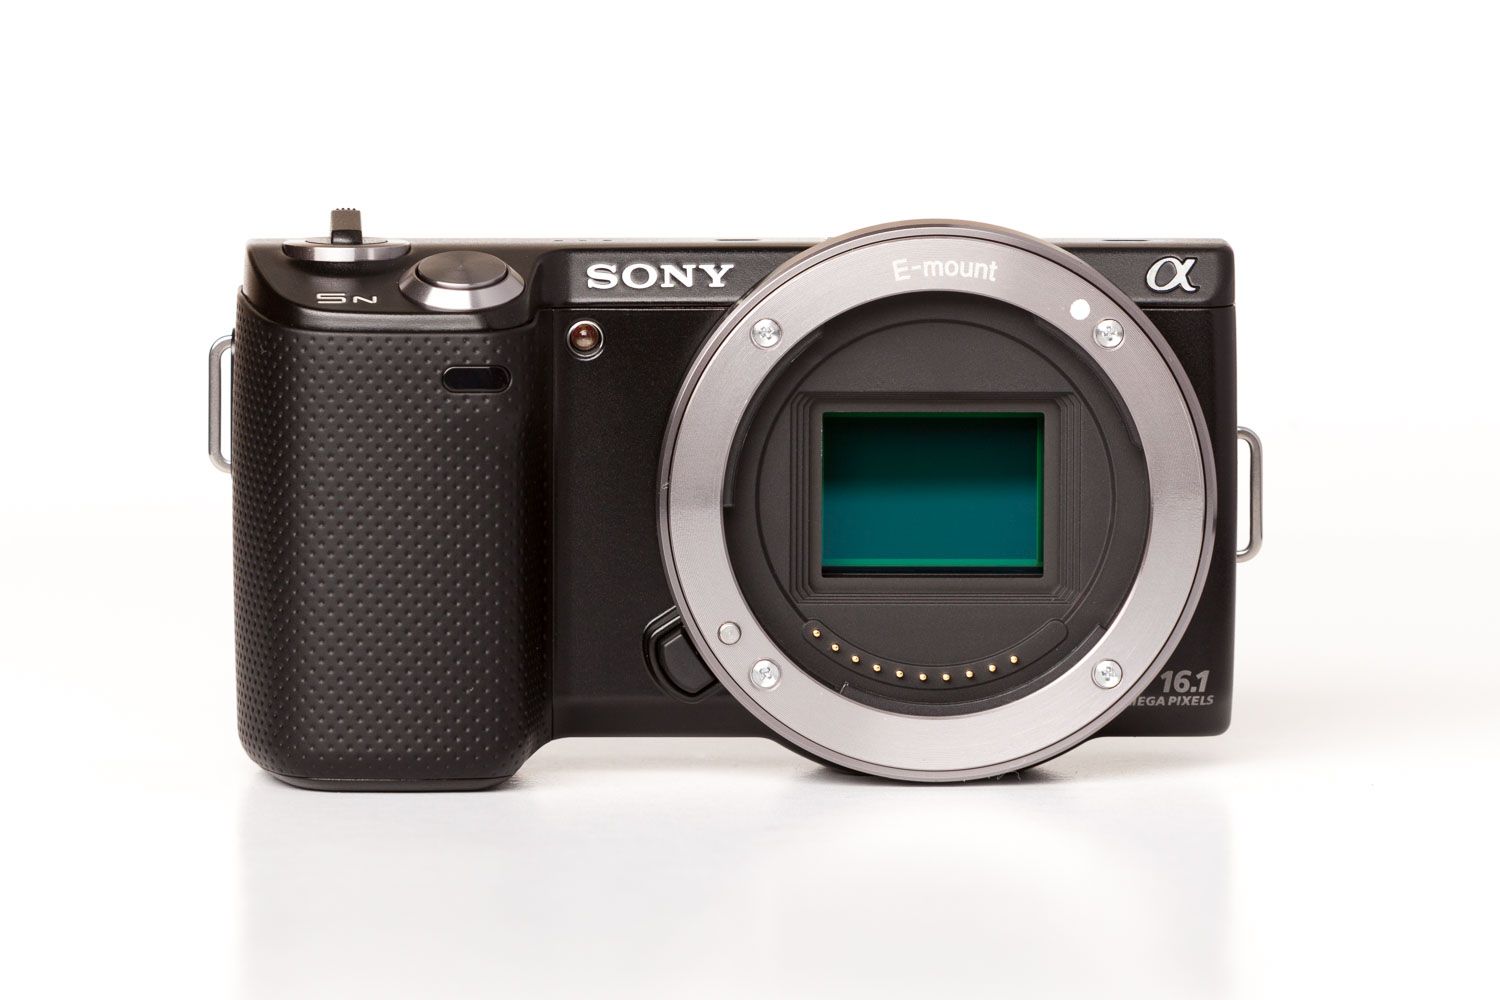 16xxx Vidoe Hd - My Sony Nex-5n | In Depth Hands on Review, Sample Photos, Sample Video, and  More â€“ SonyAlphaLab